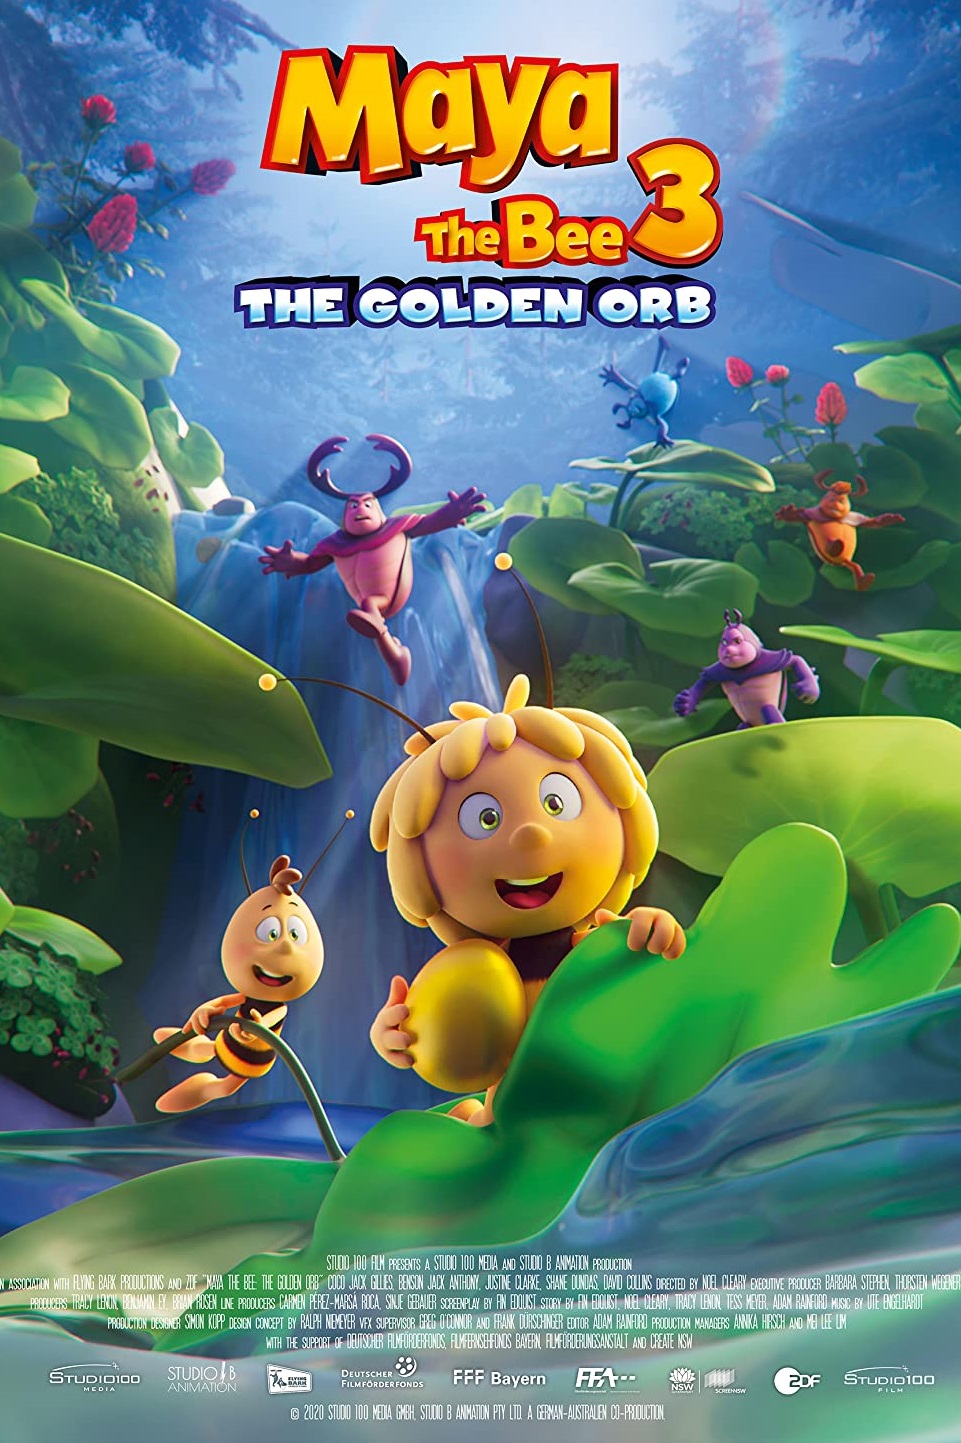 Maya the Bee 3: The Golden Orb 2021 Tamil Dubbed Adventure Movie Online